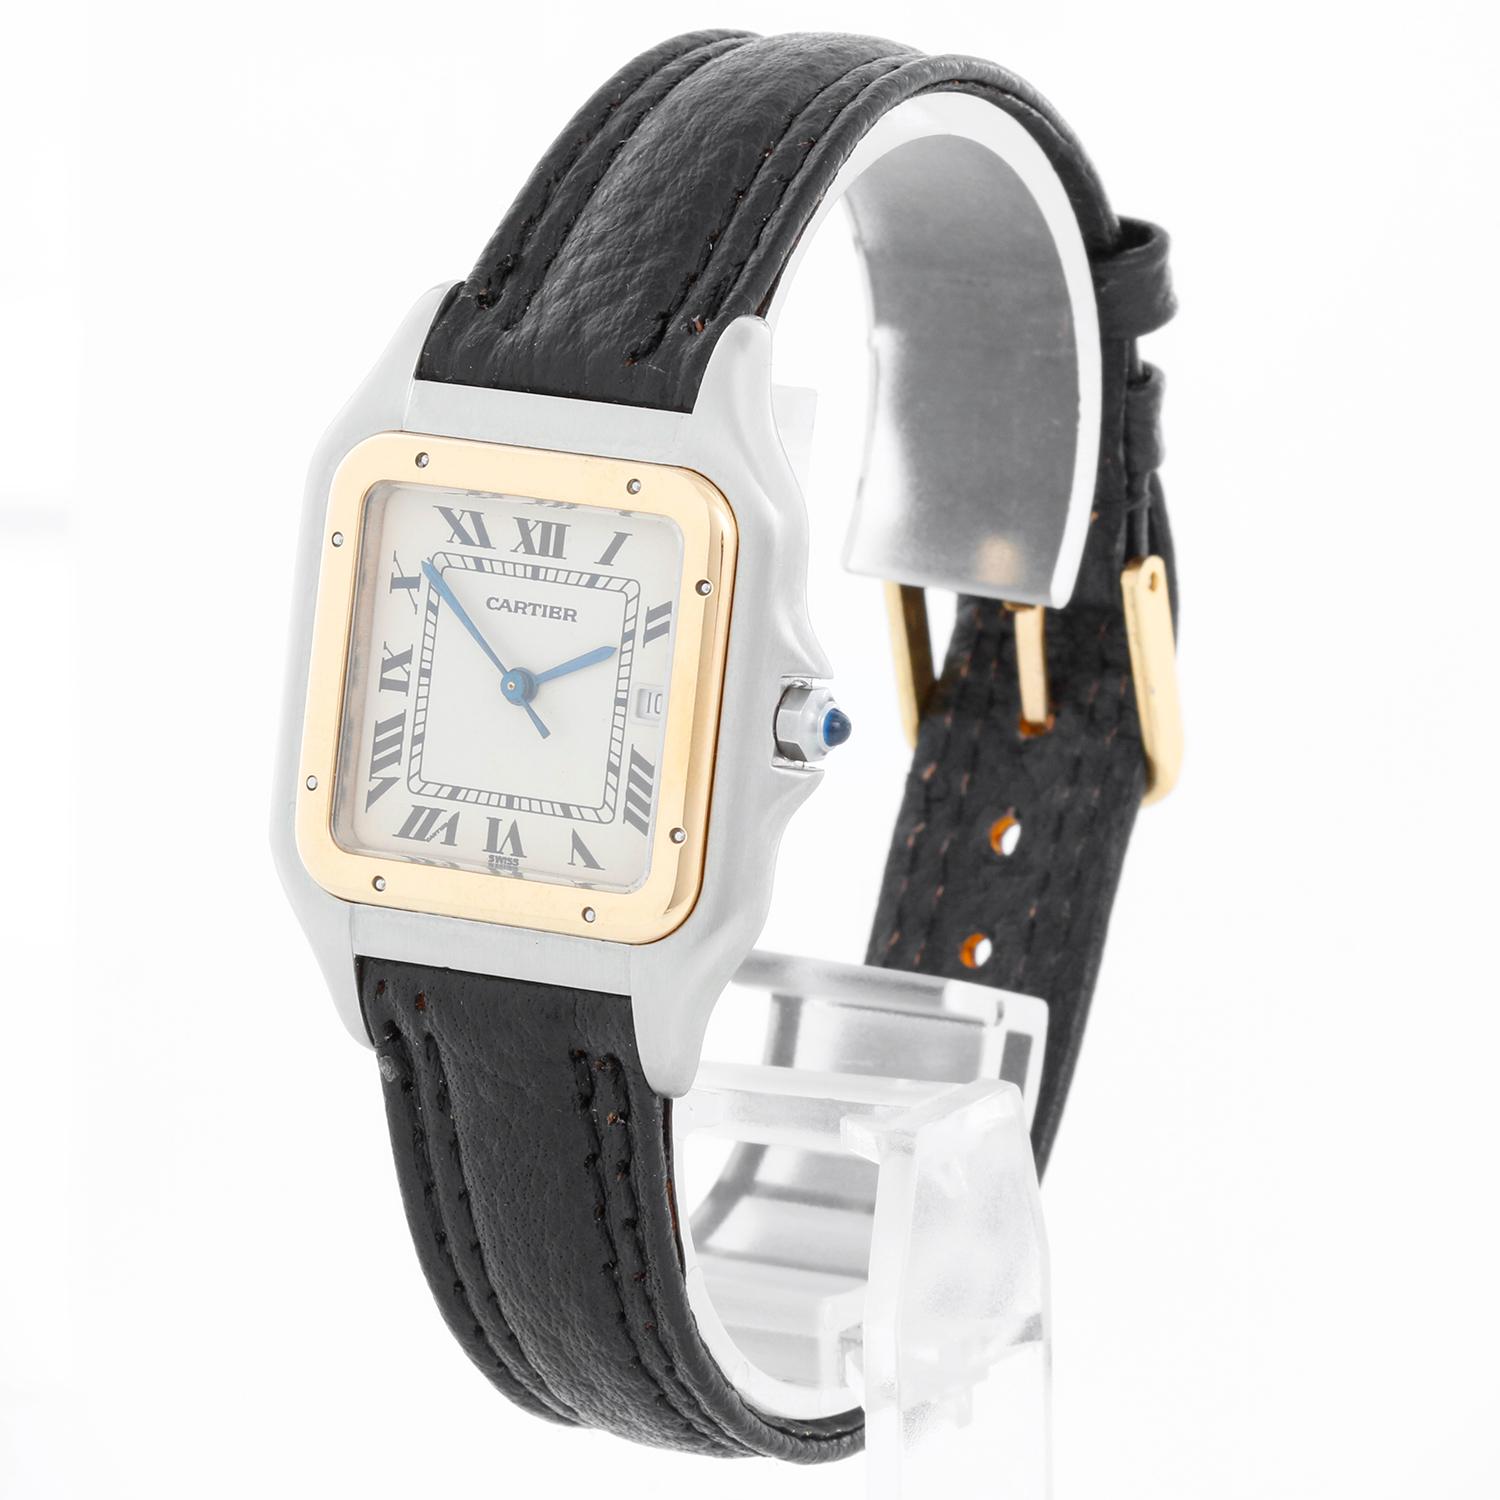 Men's Cartier Panther 2-Tone Steel & Gold Watch - Quartz. Stainless steel case with 18k yellow gold bezel (29mm x 40mm). Ivory colored dial with black Roman numerals and date at 3 o'clock. Black leather strap and generic buckle. Pre-owned with